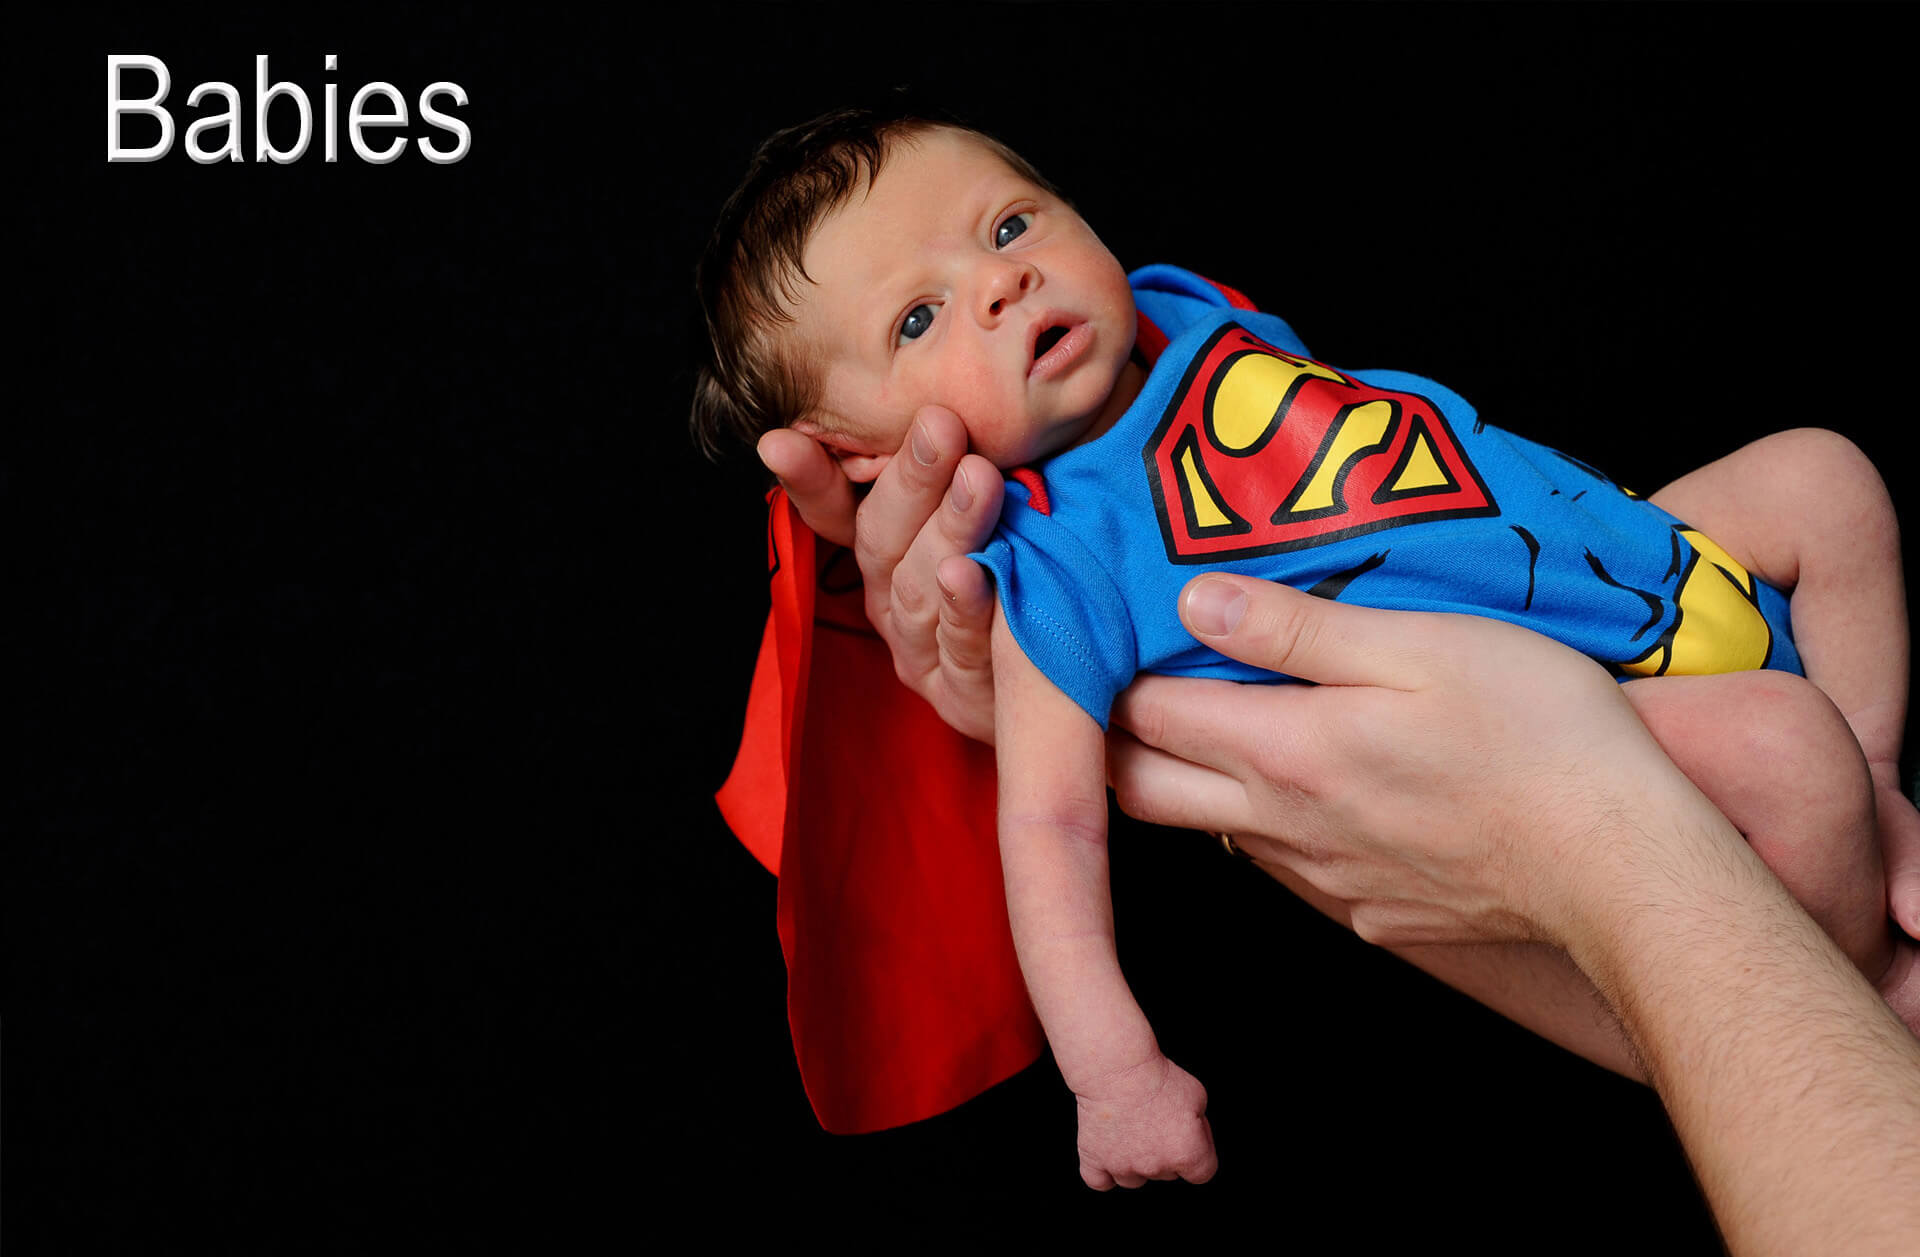 A super baby was born in the metro Detroit, Michigan area as this babe poses at the Troy studio in his Superman baby outfit.